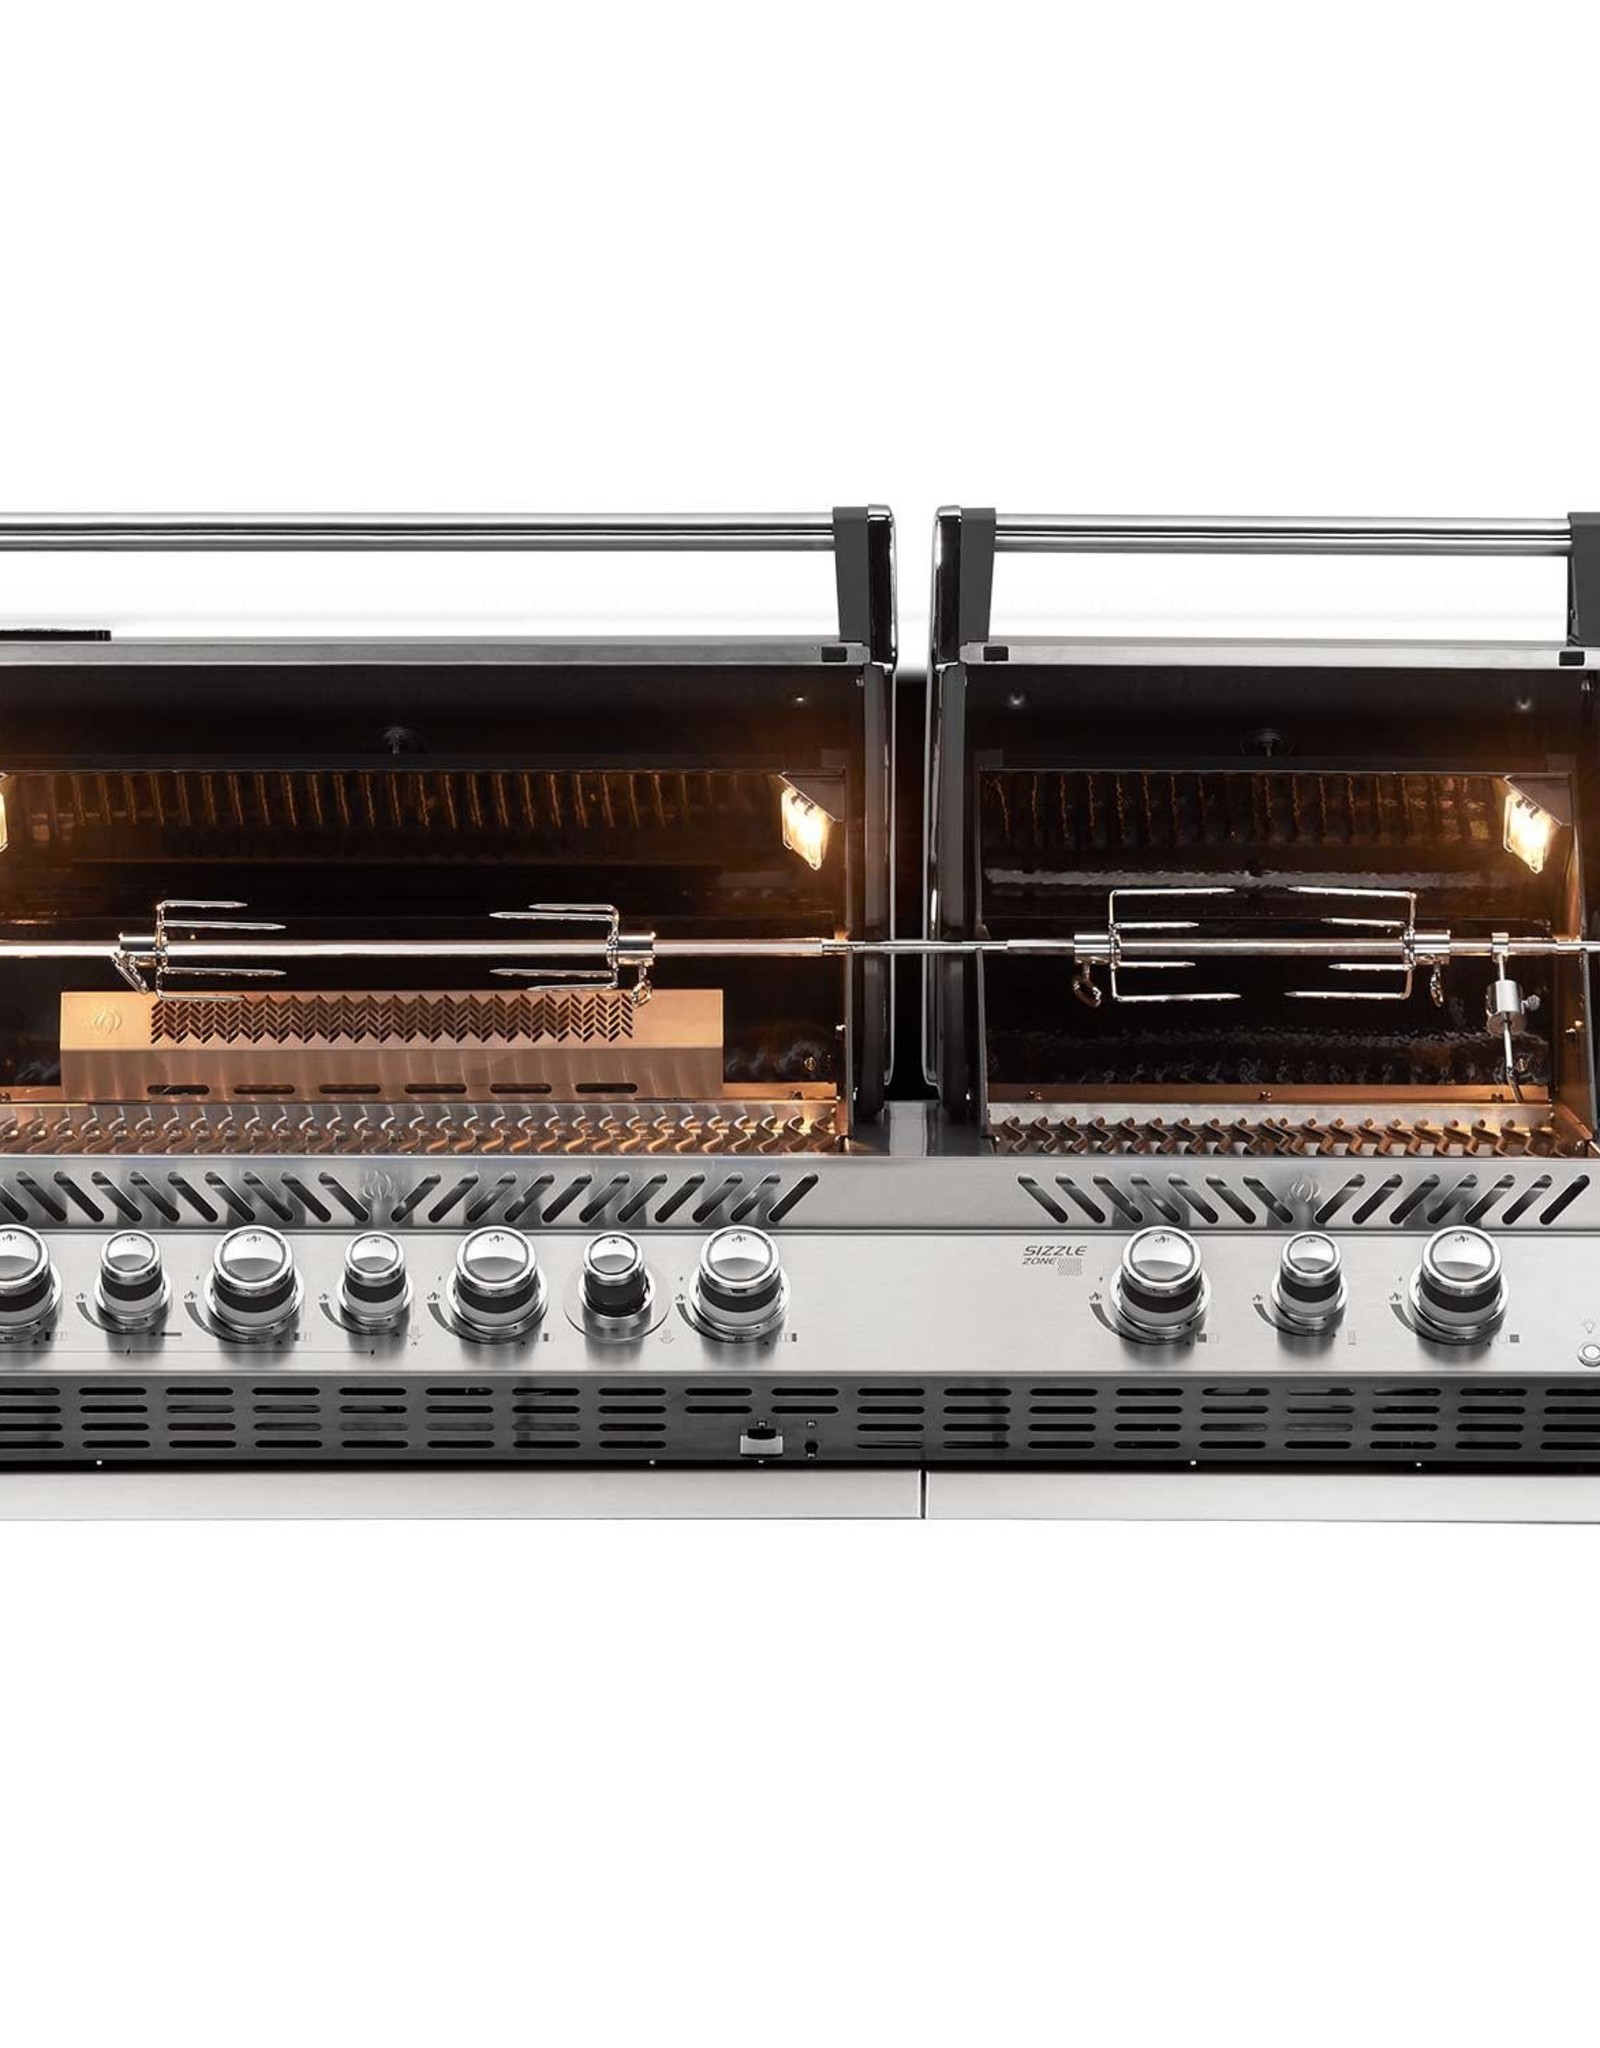 Napoleon Napoleon Prestige PRO 825 Built-in Natural Gas Grill with Infrared Rear Burner and Infrared Sear Burners and Rotisserie Kit - BIPRO825RBINSS-3